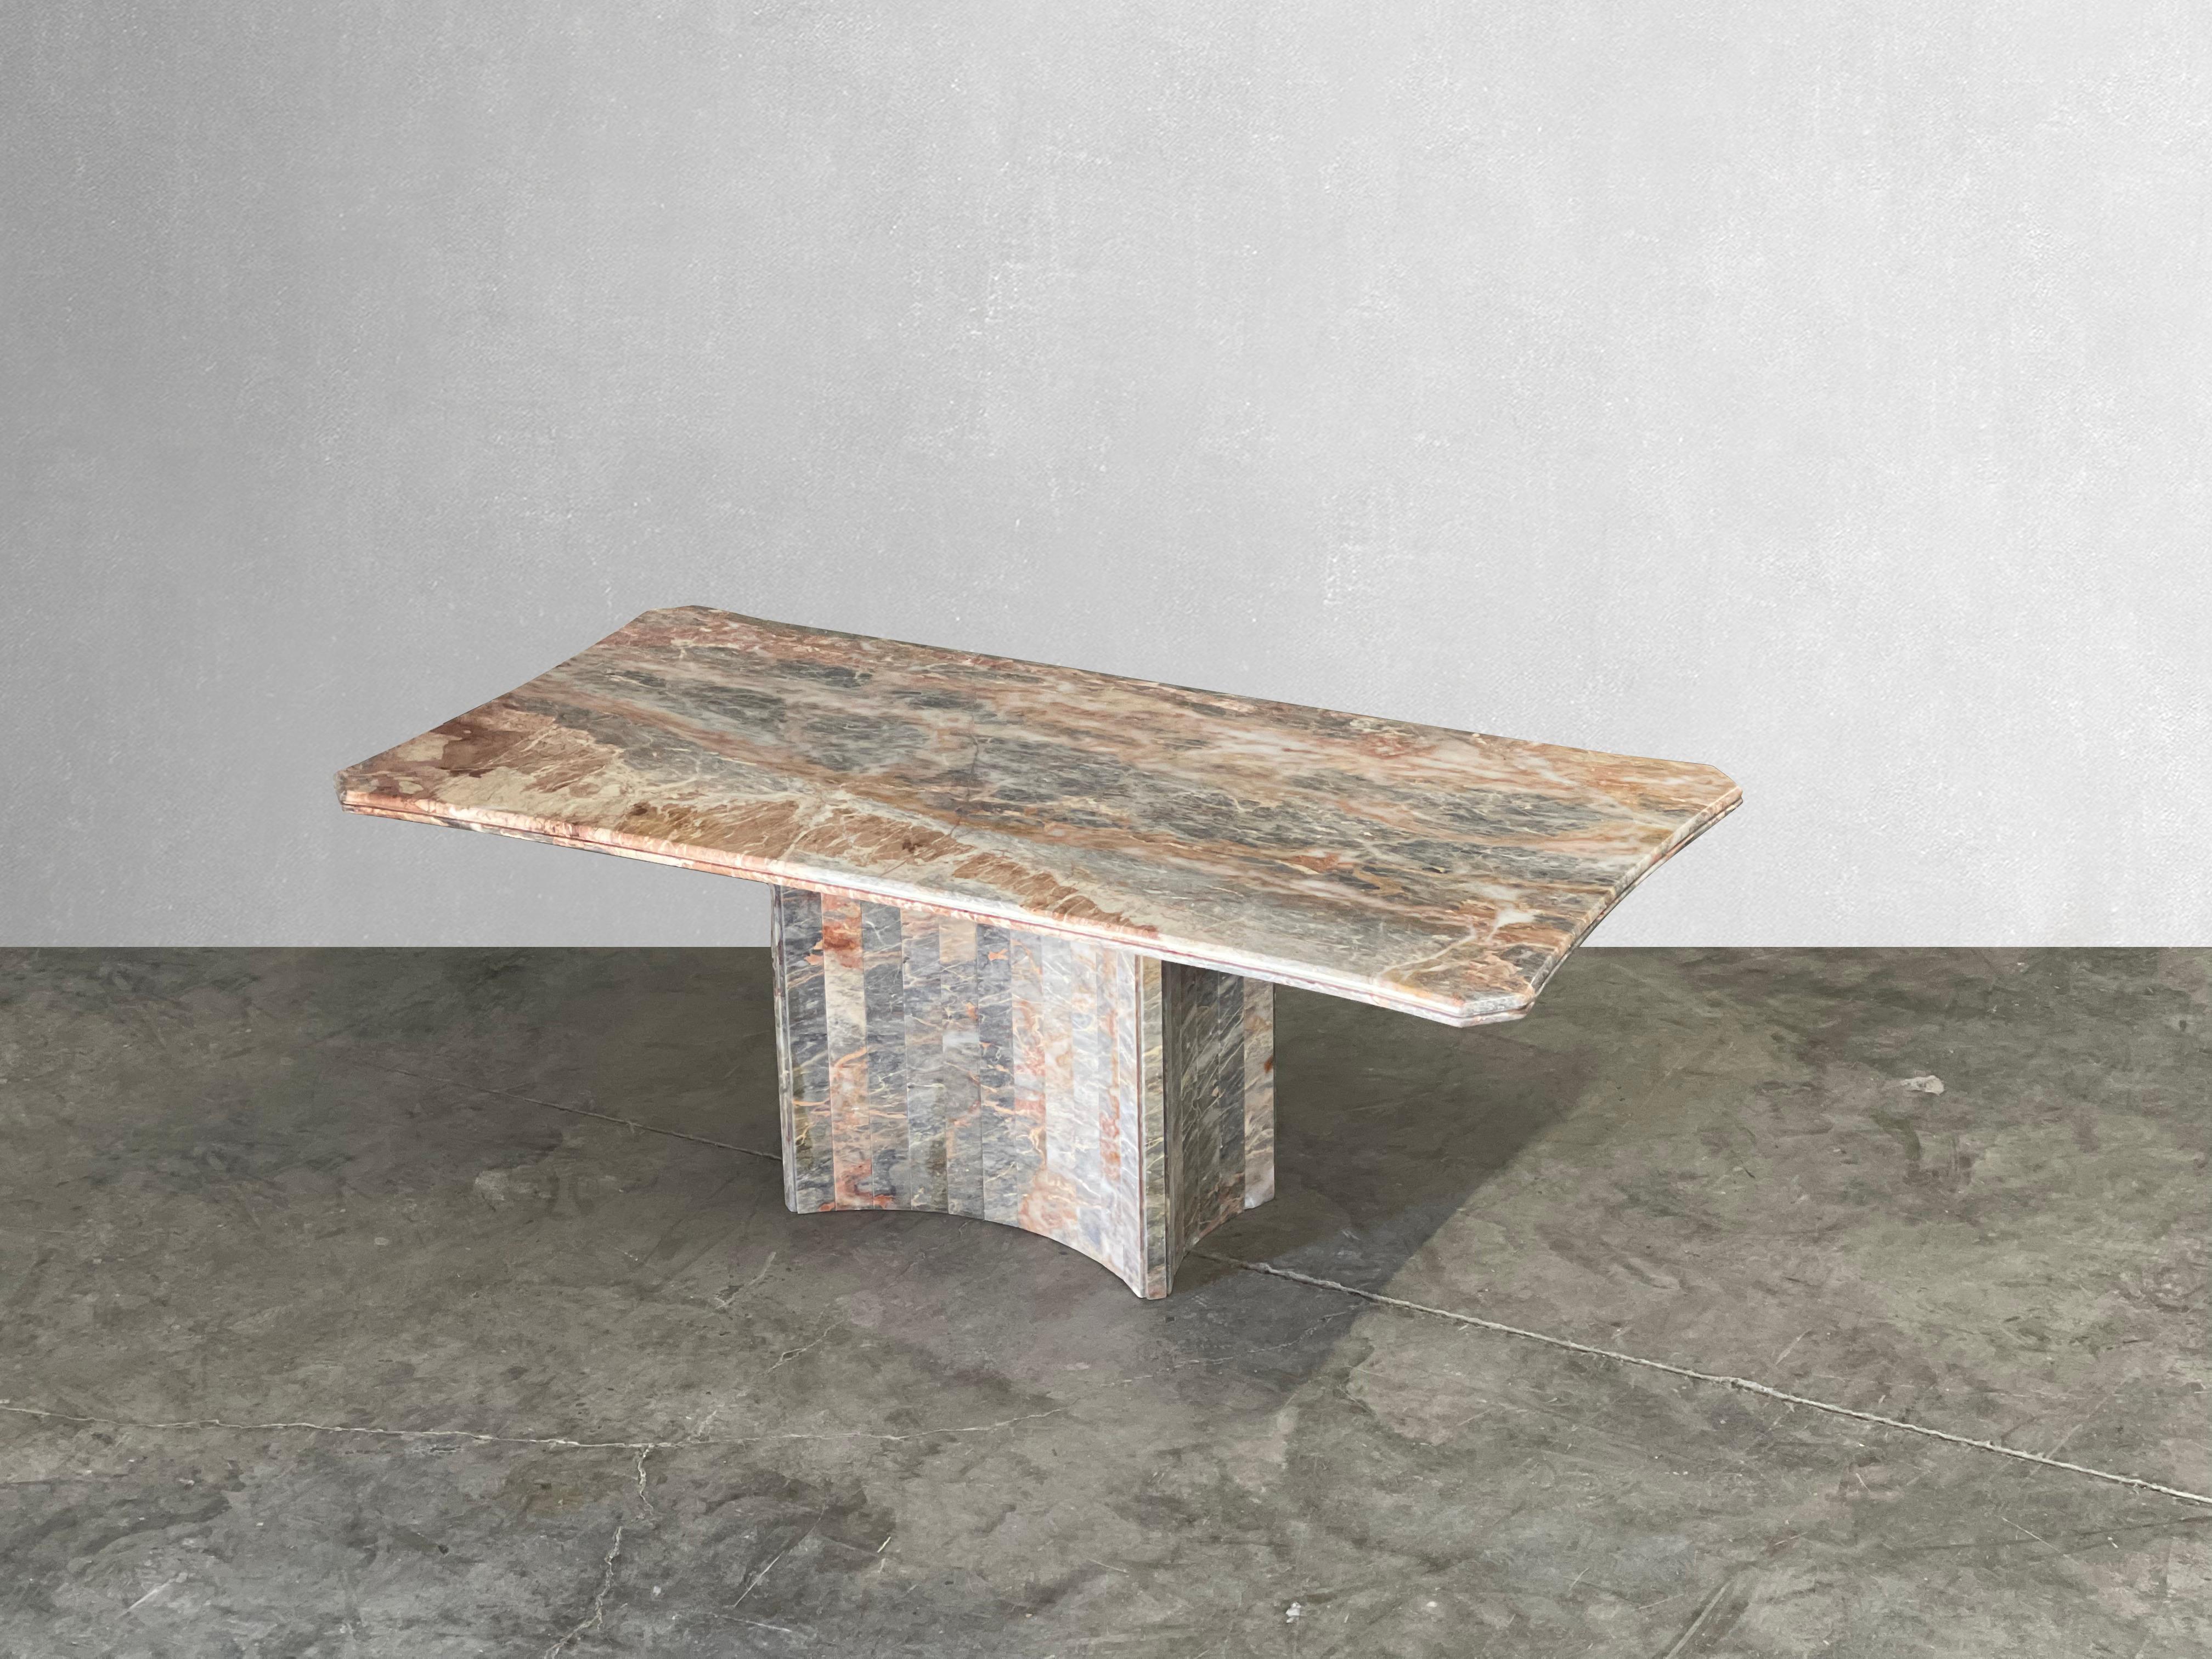 This dining table boasts a beautiful Italian Fior di Pesco marble top with hues of grays and rusts. The base is curved with a slatted detail. The top of this table has some of the most beautiful movement and colors we've seen yet!

Angled corners